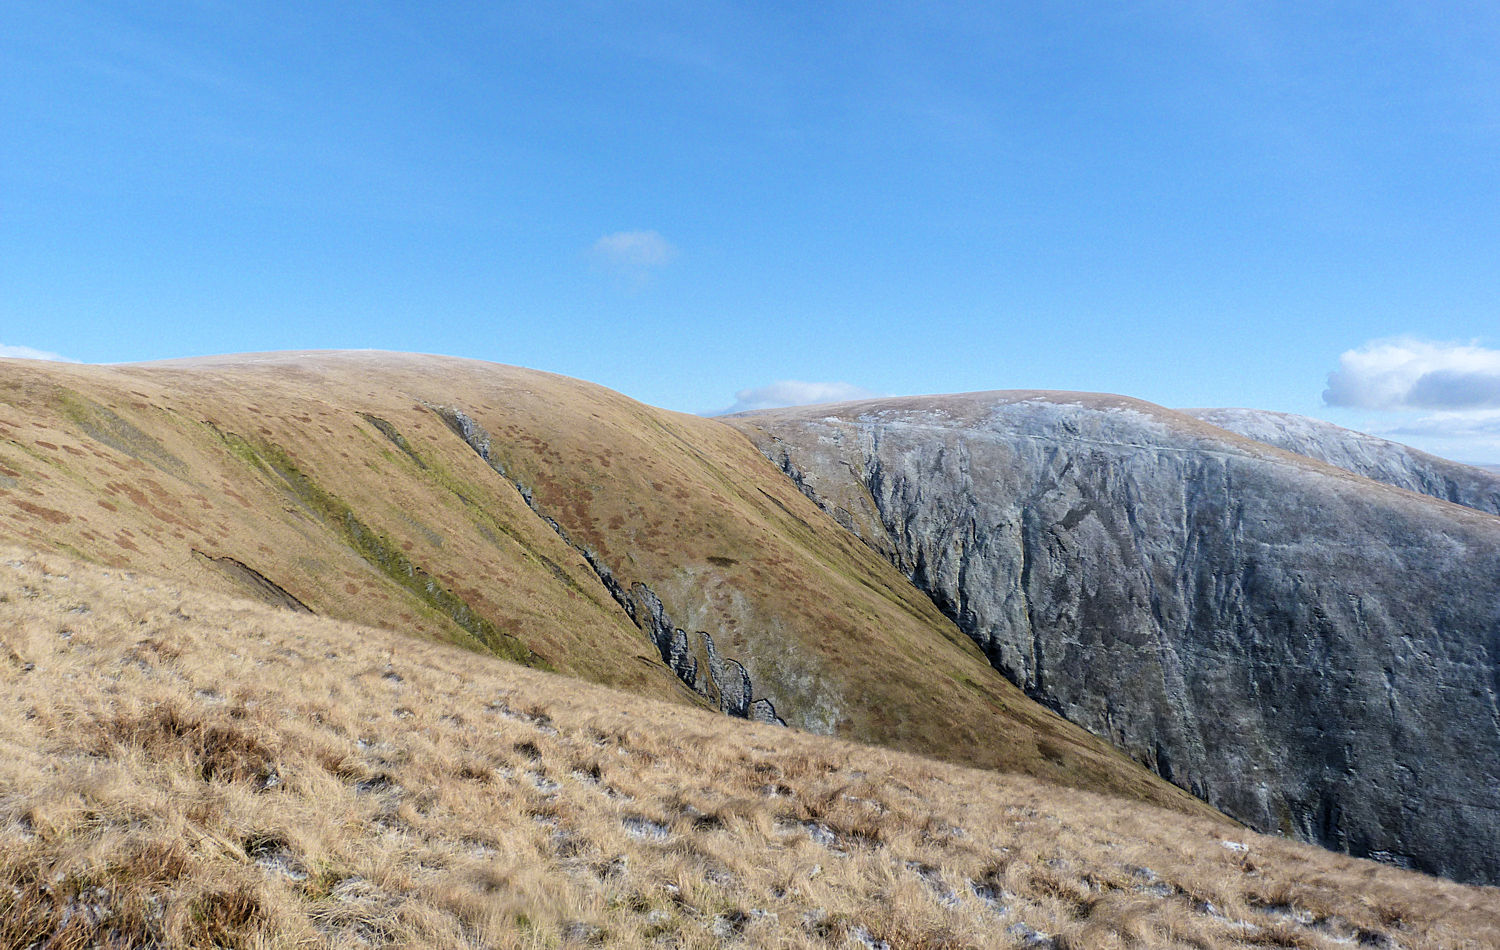 On the Howgills